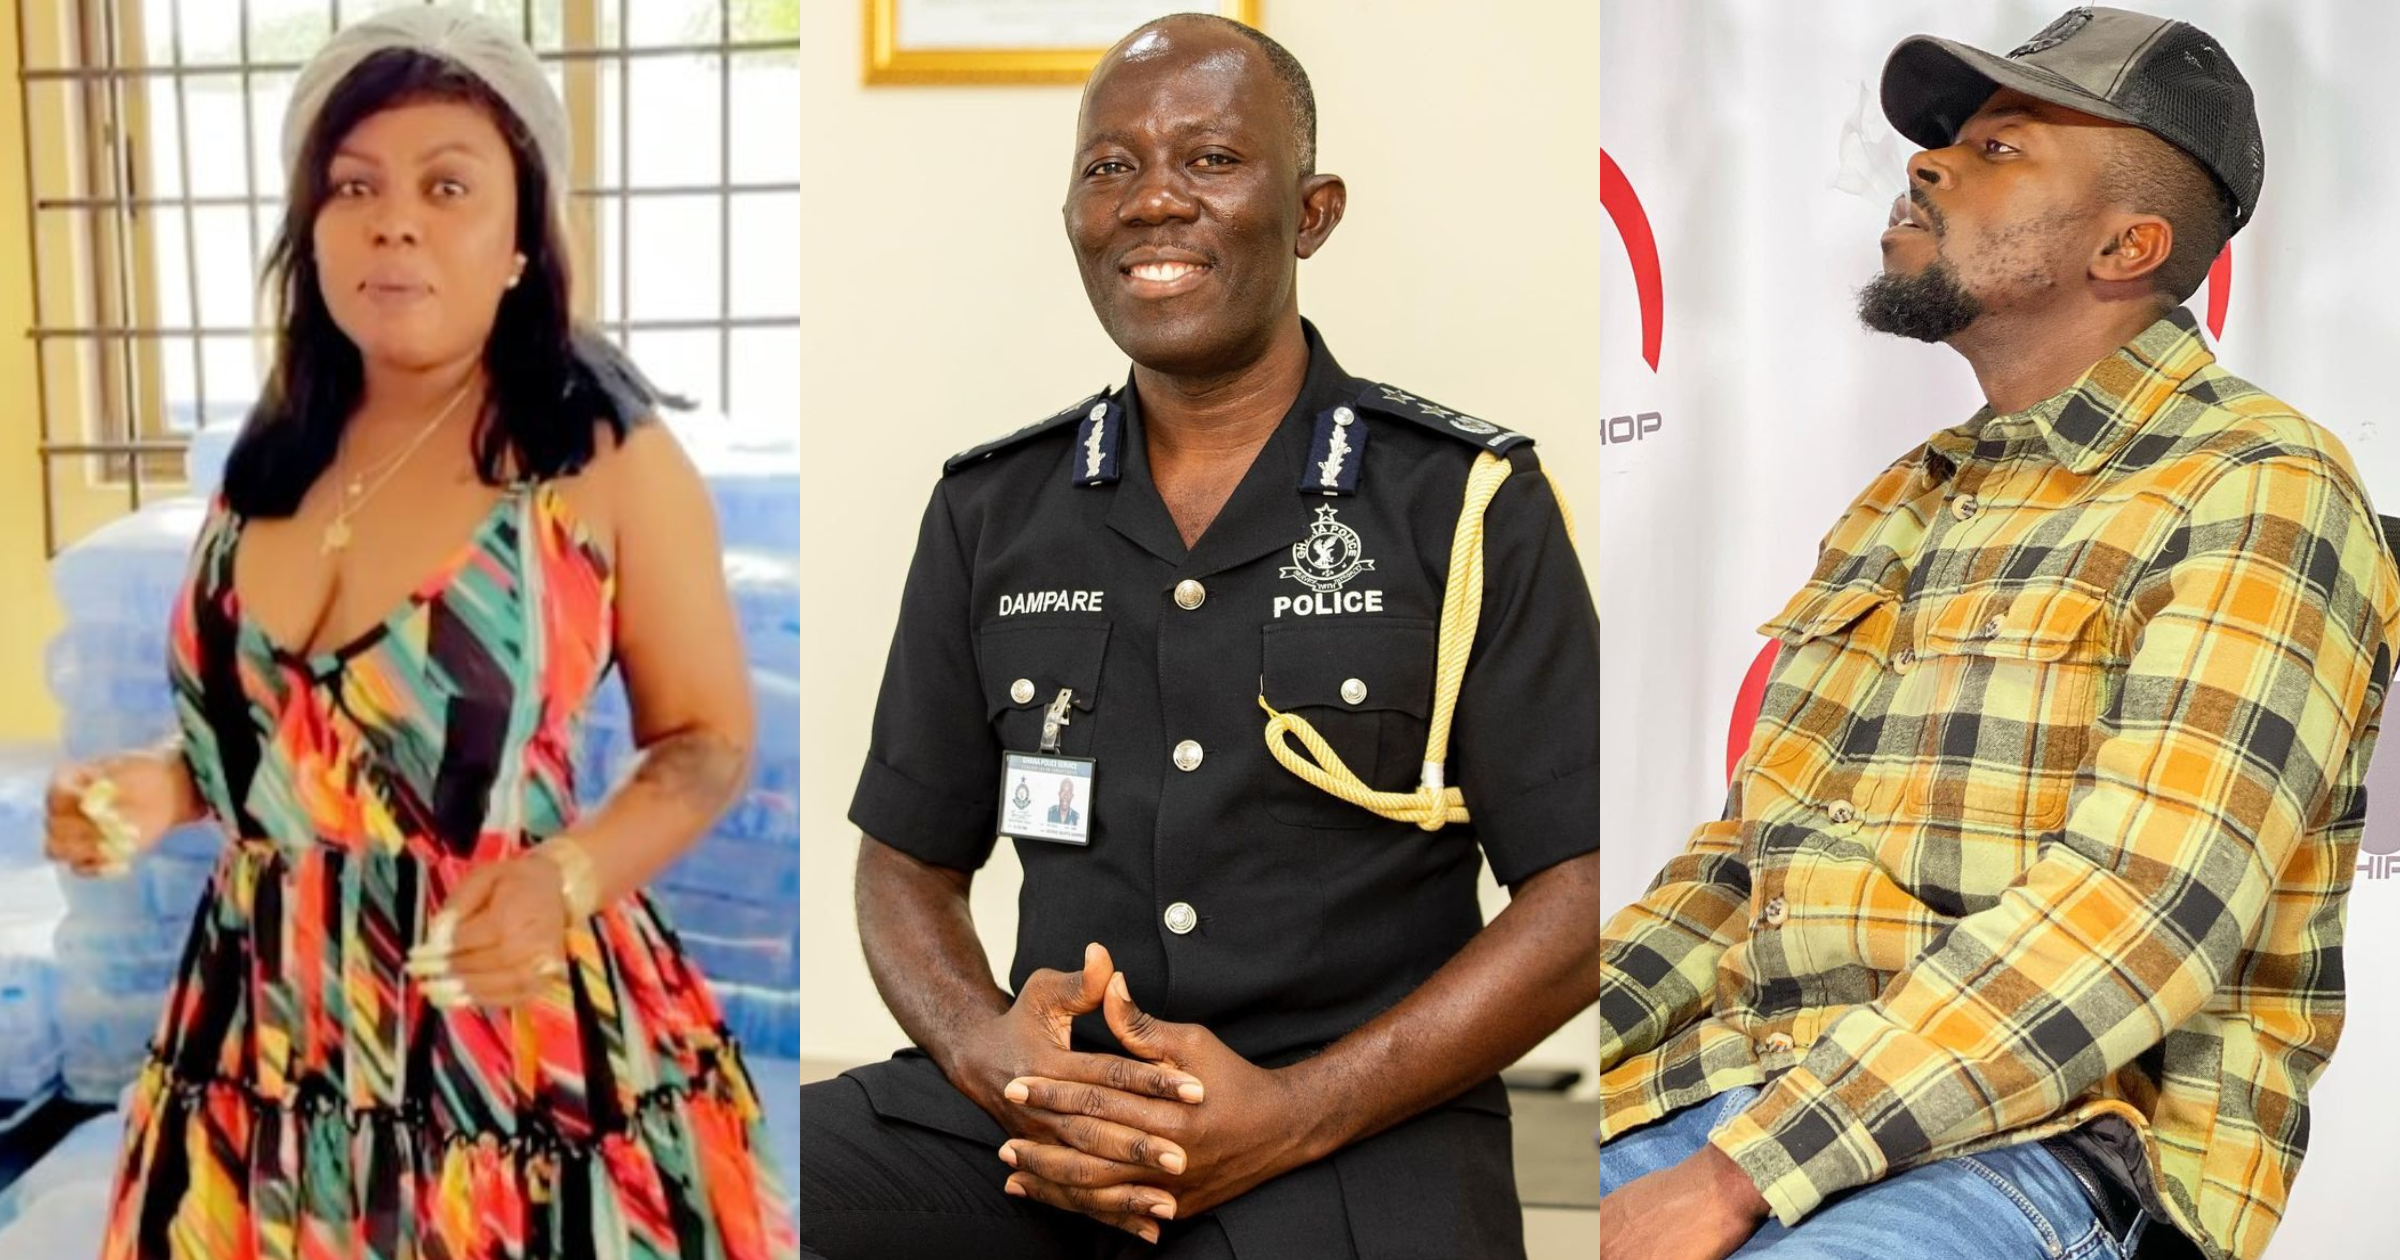 Afia Schwar, Ken Agyapong & 3 other 'celebs' who should 'fear' Dampare and change their ways before he gets them